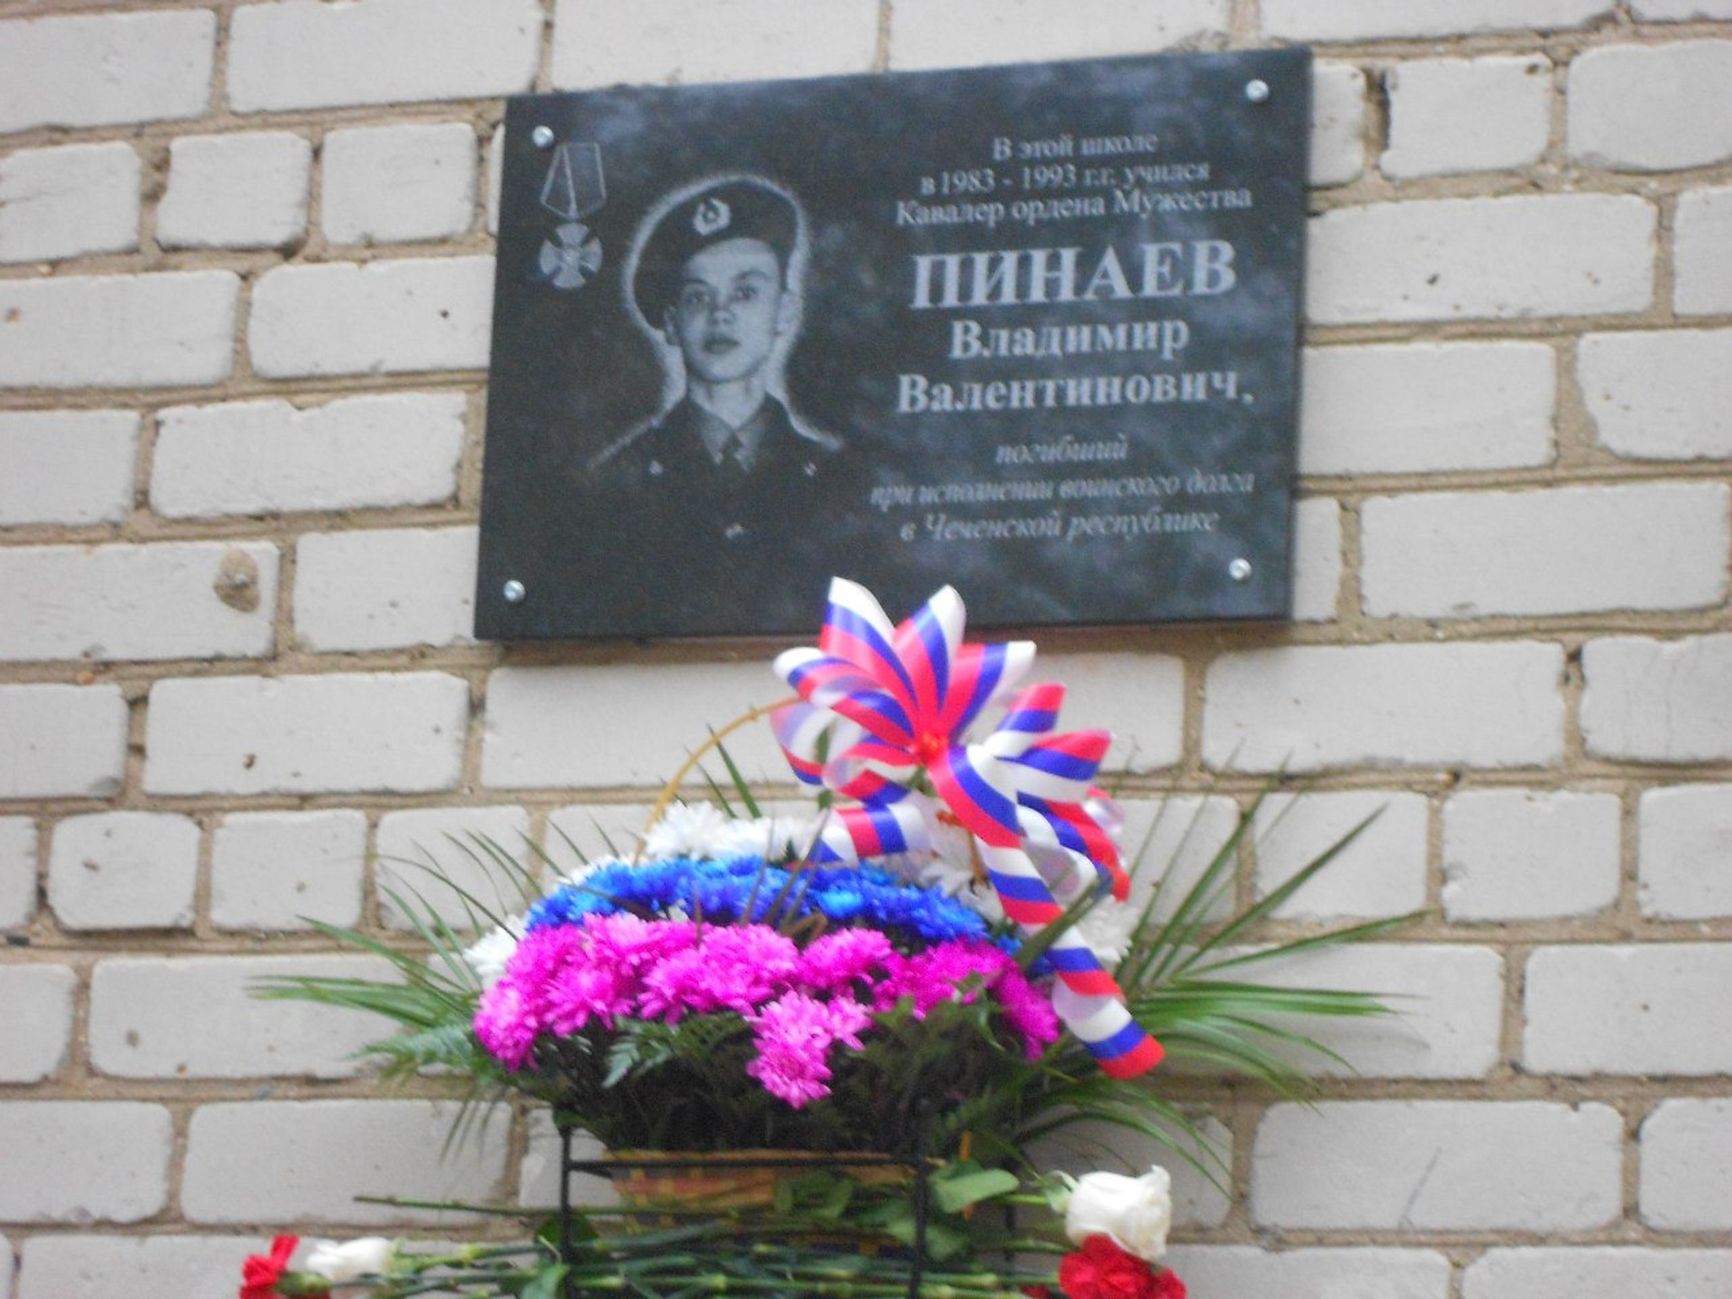  The commemorative plaque installed at the school where Pinaev studied